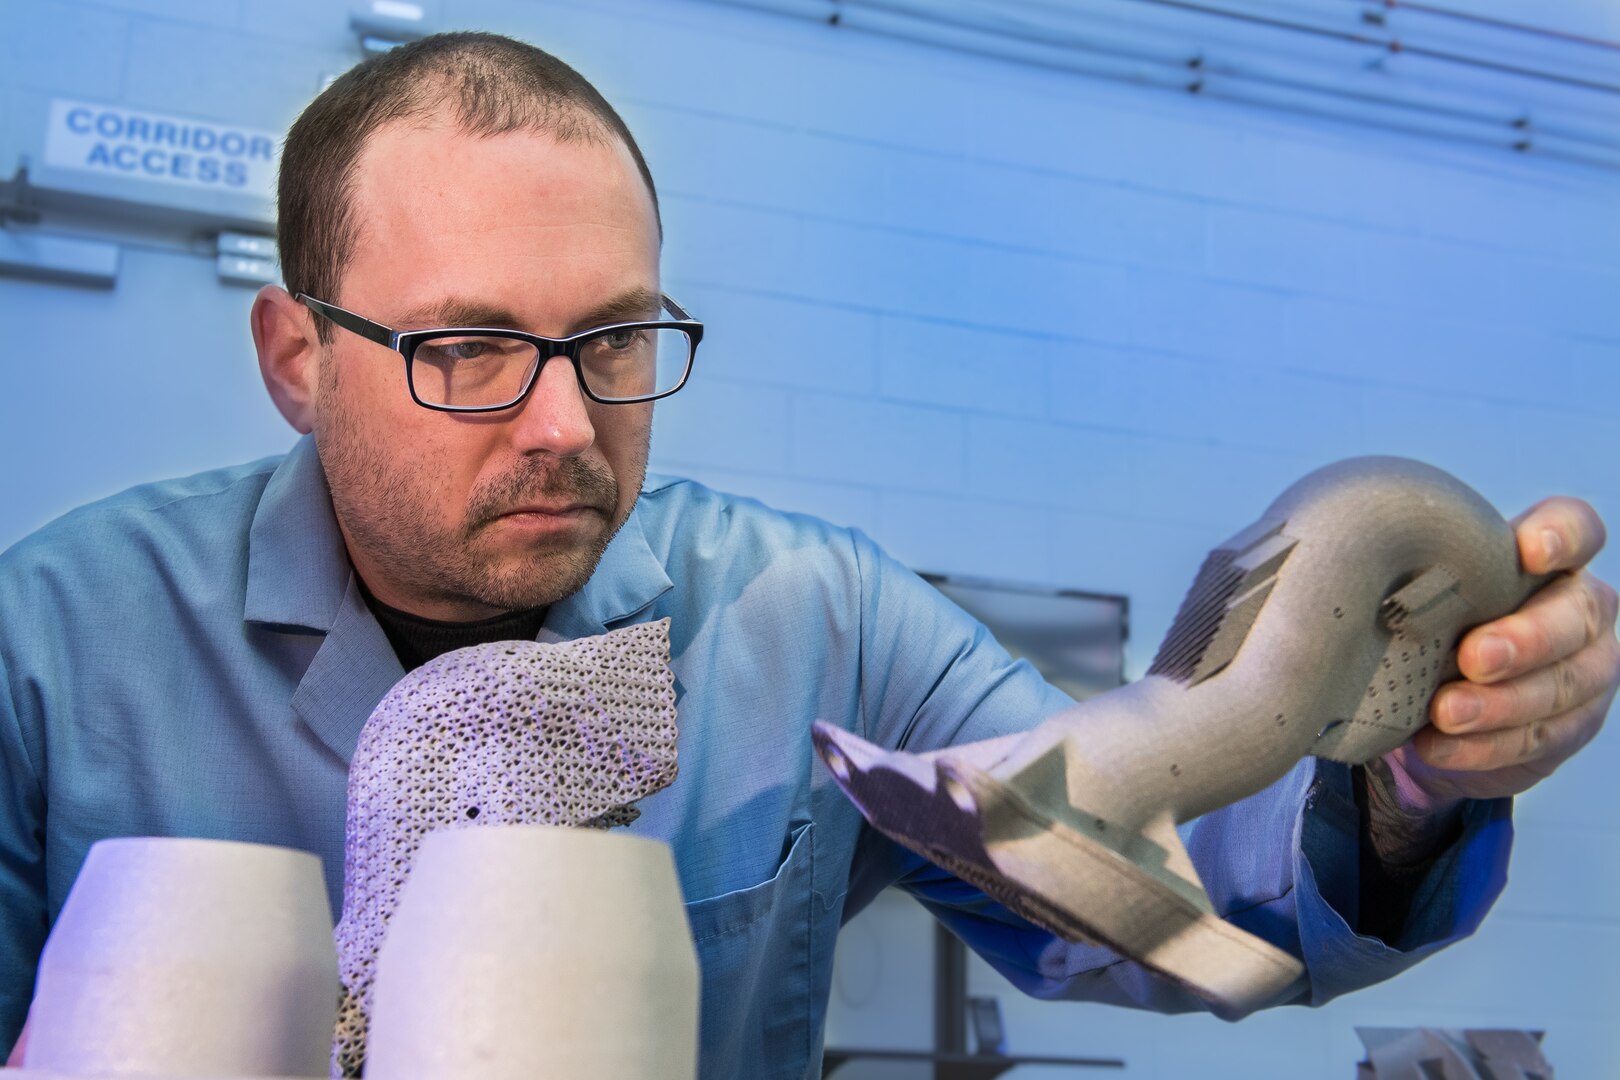 Army researcher Dr. Brandon McWilliams holds sample part created from powder at U.S. Army Combat Capabilities Development Command’s Army Research Laboratory, Aberdeen Proving Ground, Maryland, February 25, 2019 (U.S. Army/David McNally)